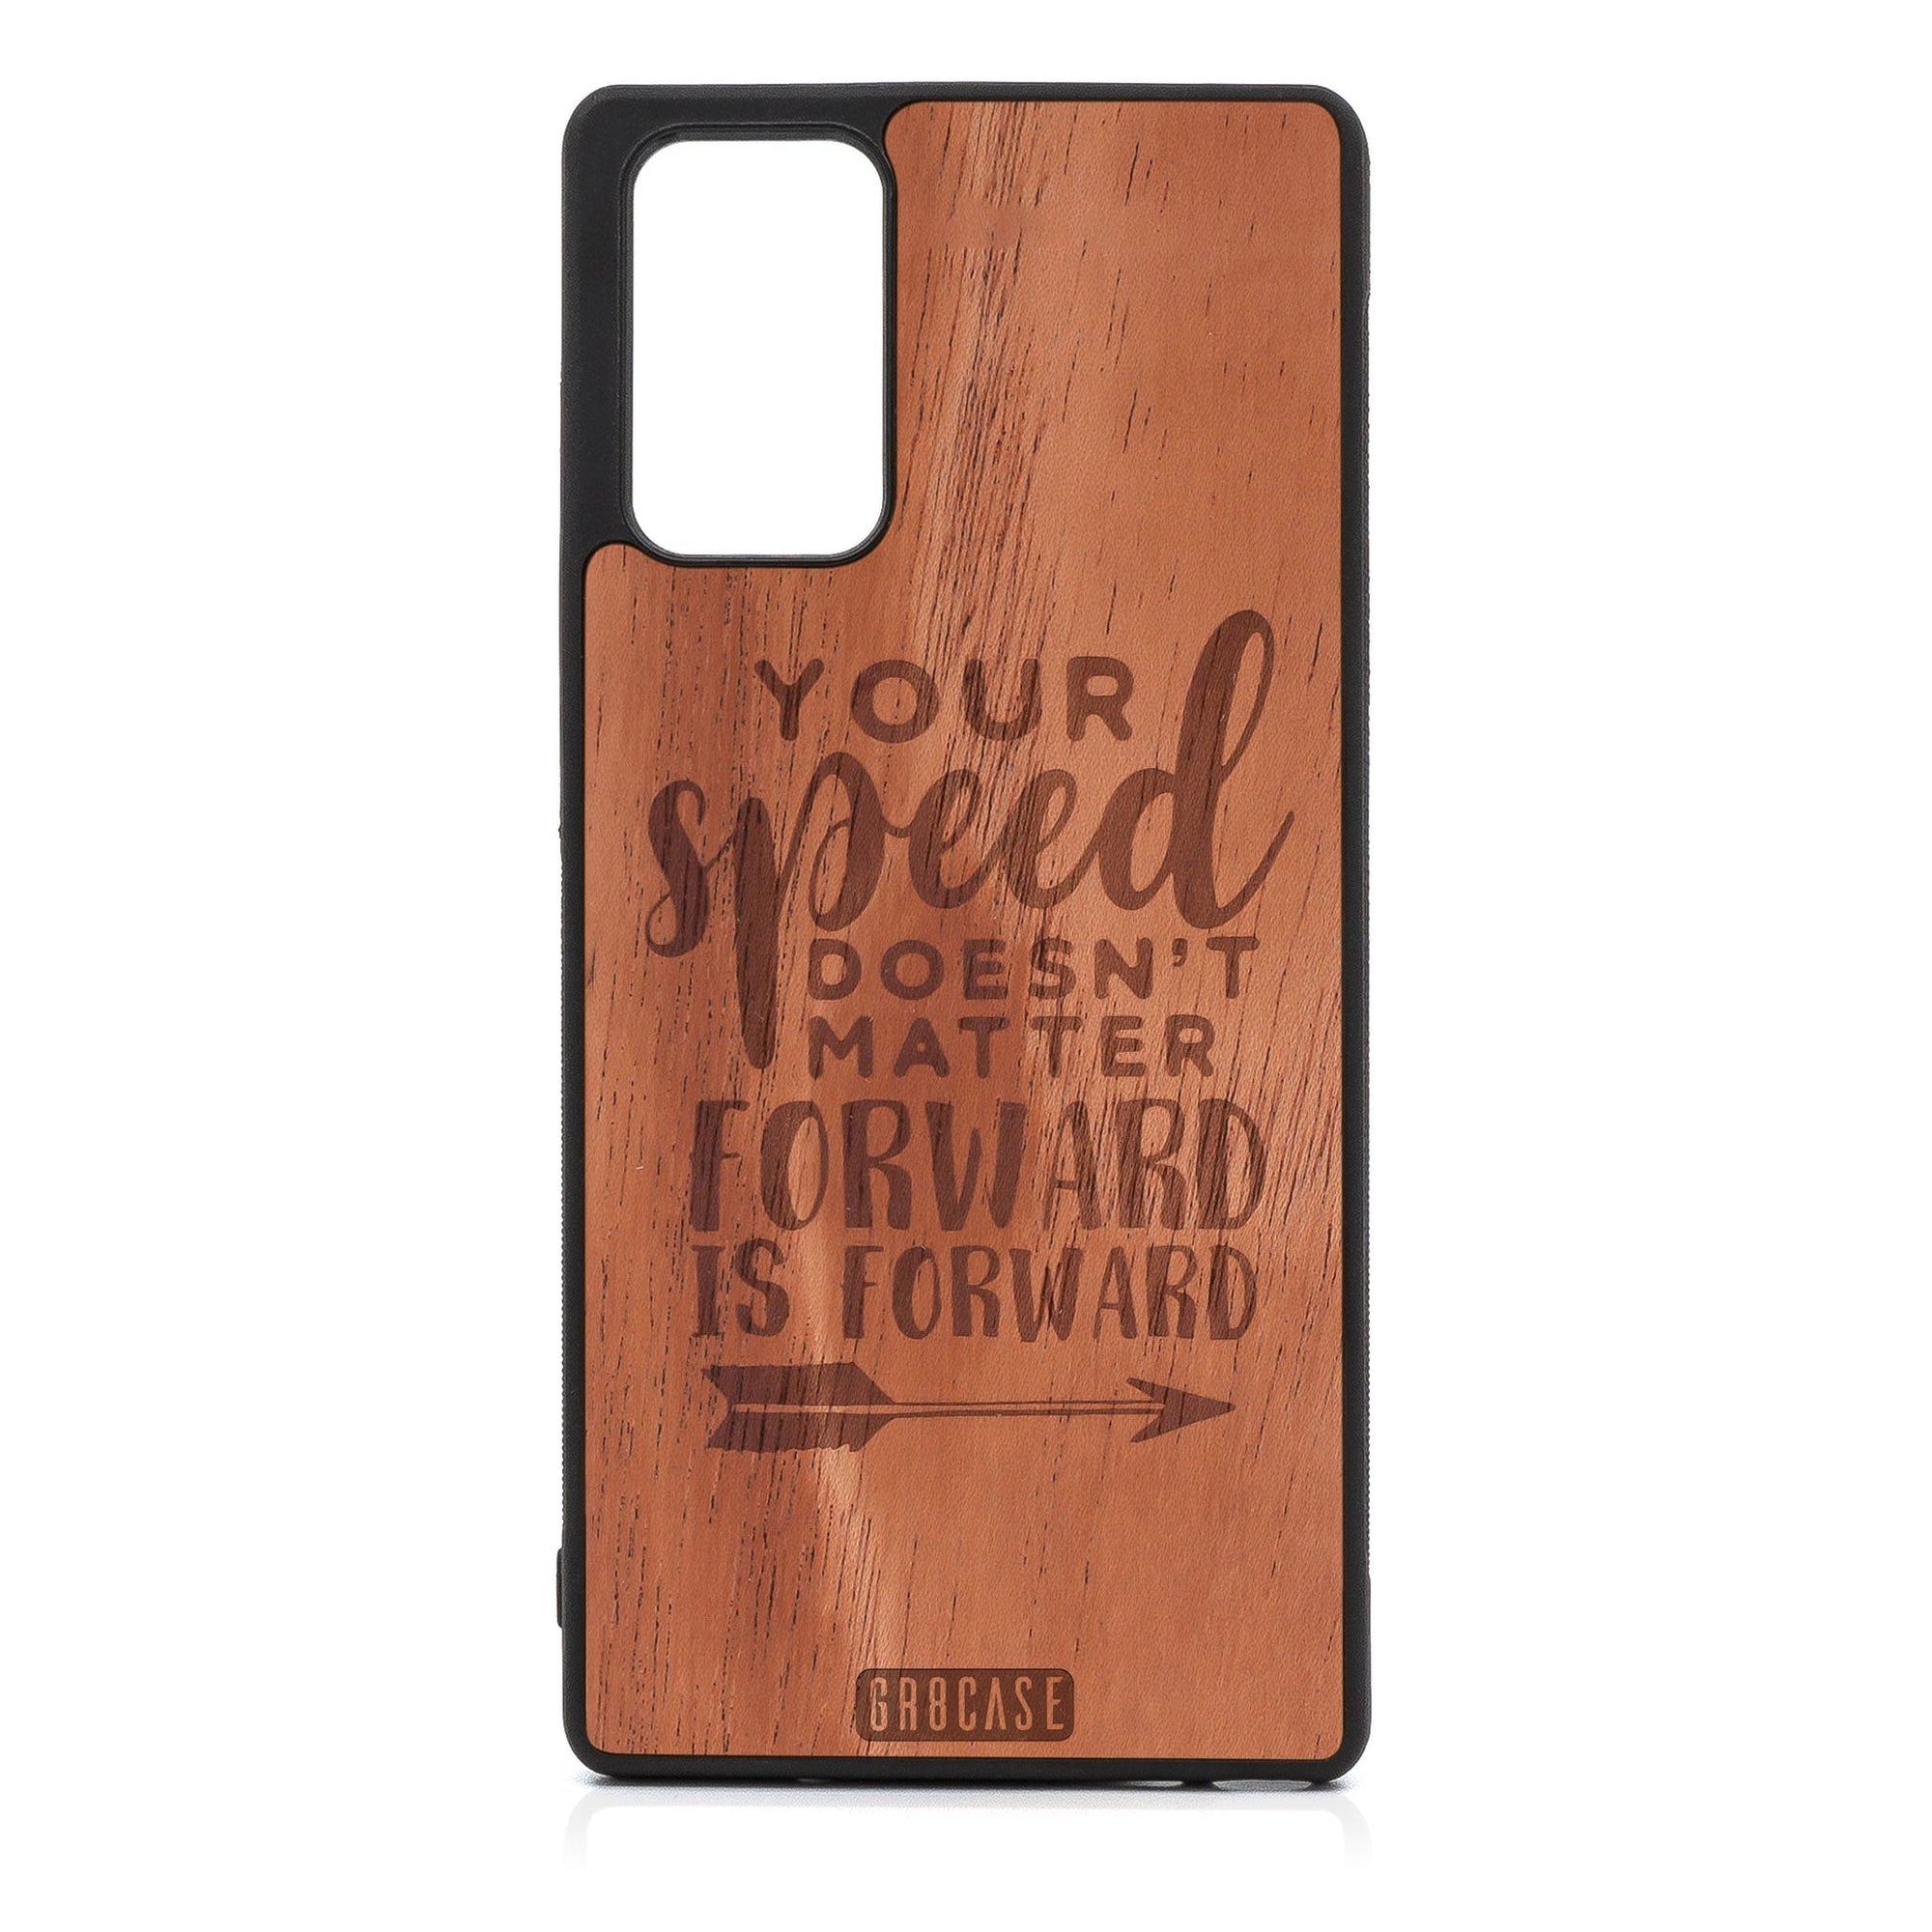 Your Speed Doesn't Matter Forward Is Forward Design Wood Case For Samsung Galaxy A72 5G